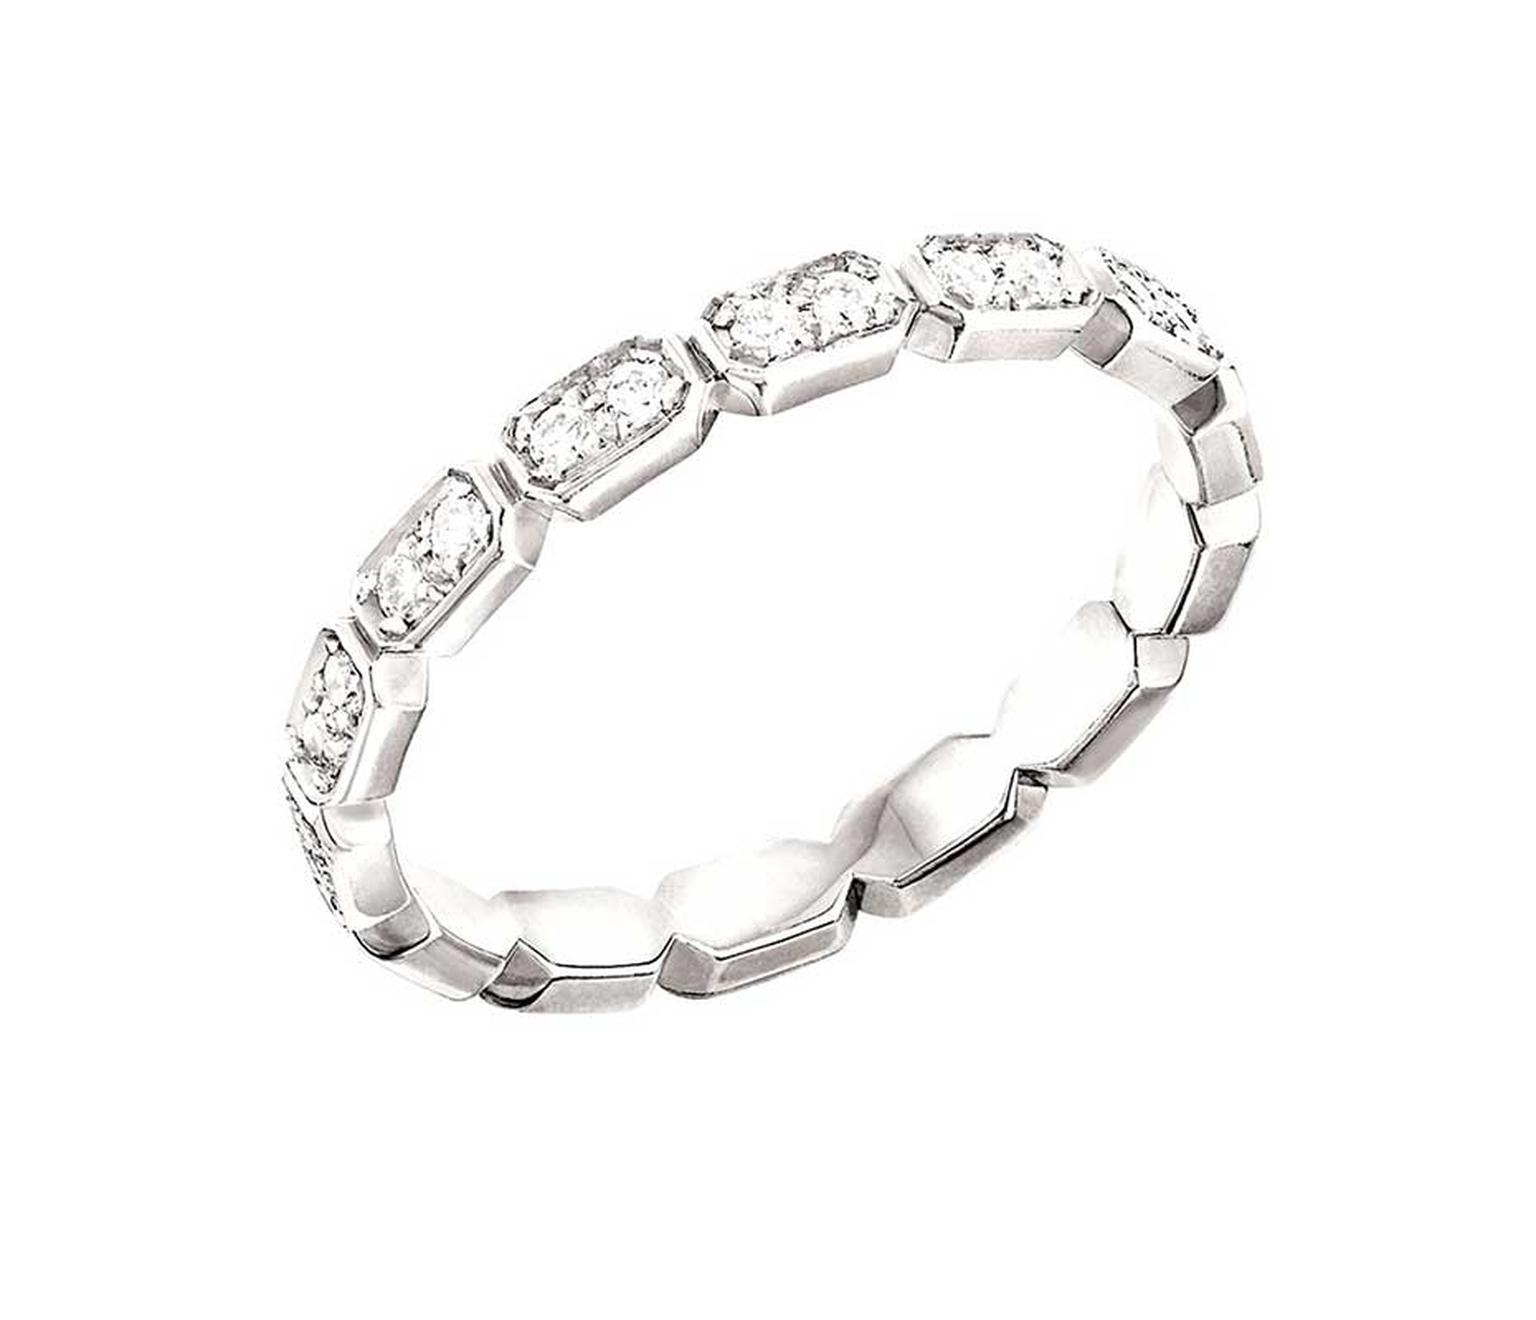 Chanel Première diamond eternity ring in white gold.